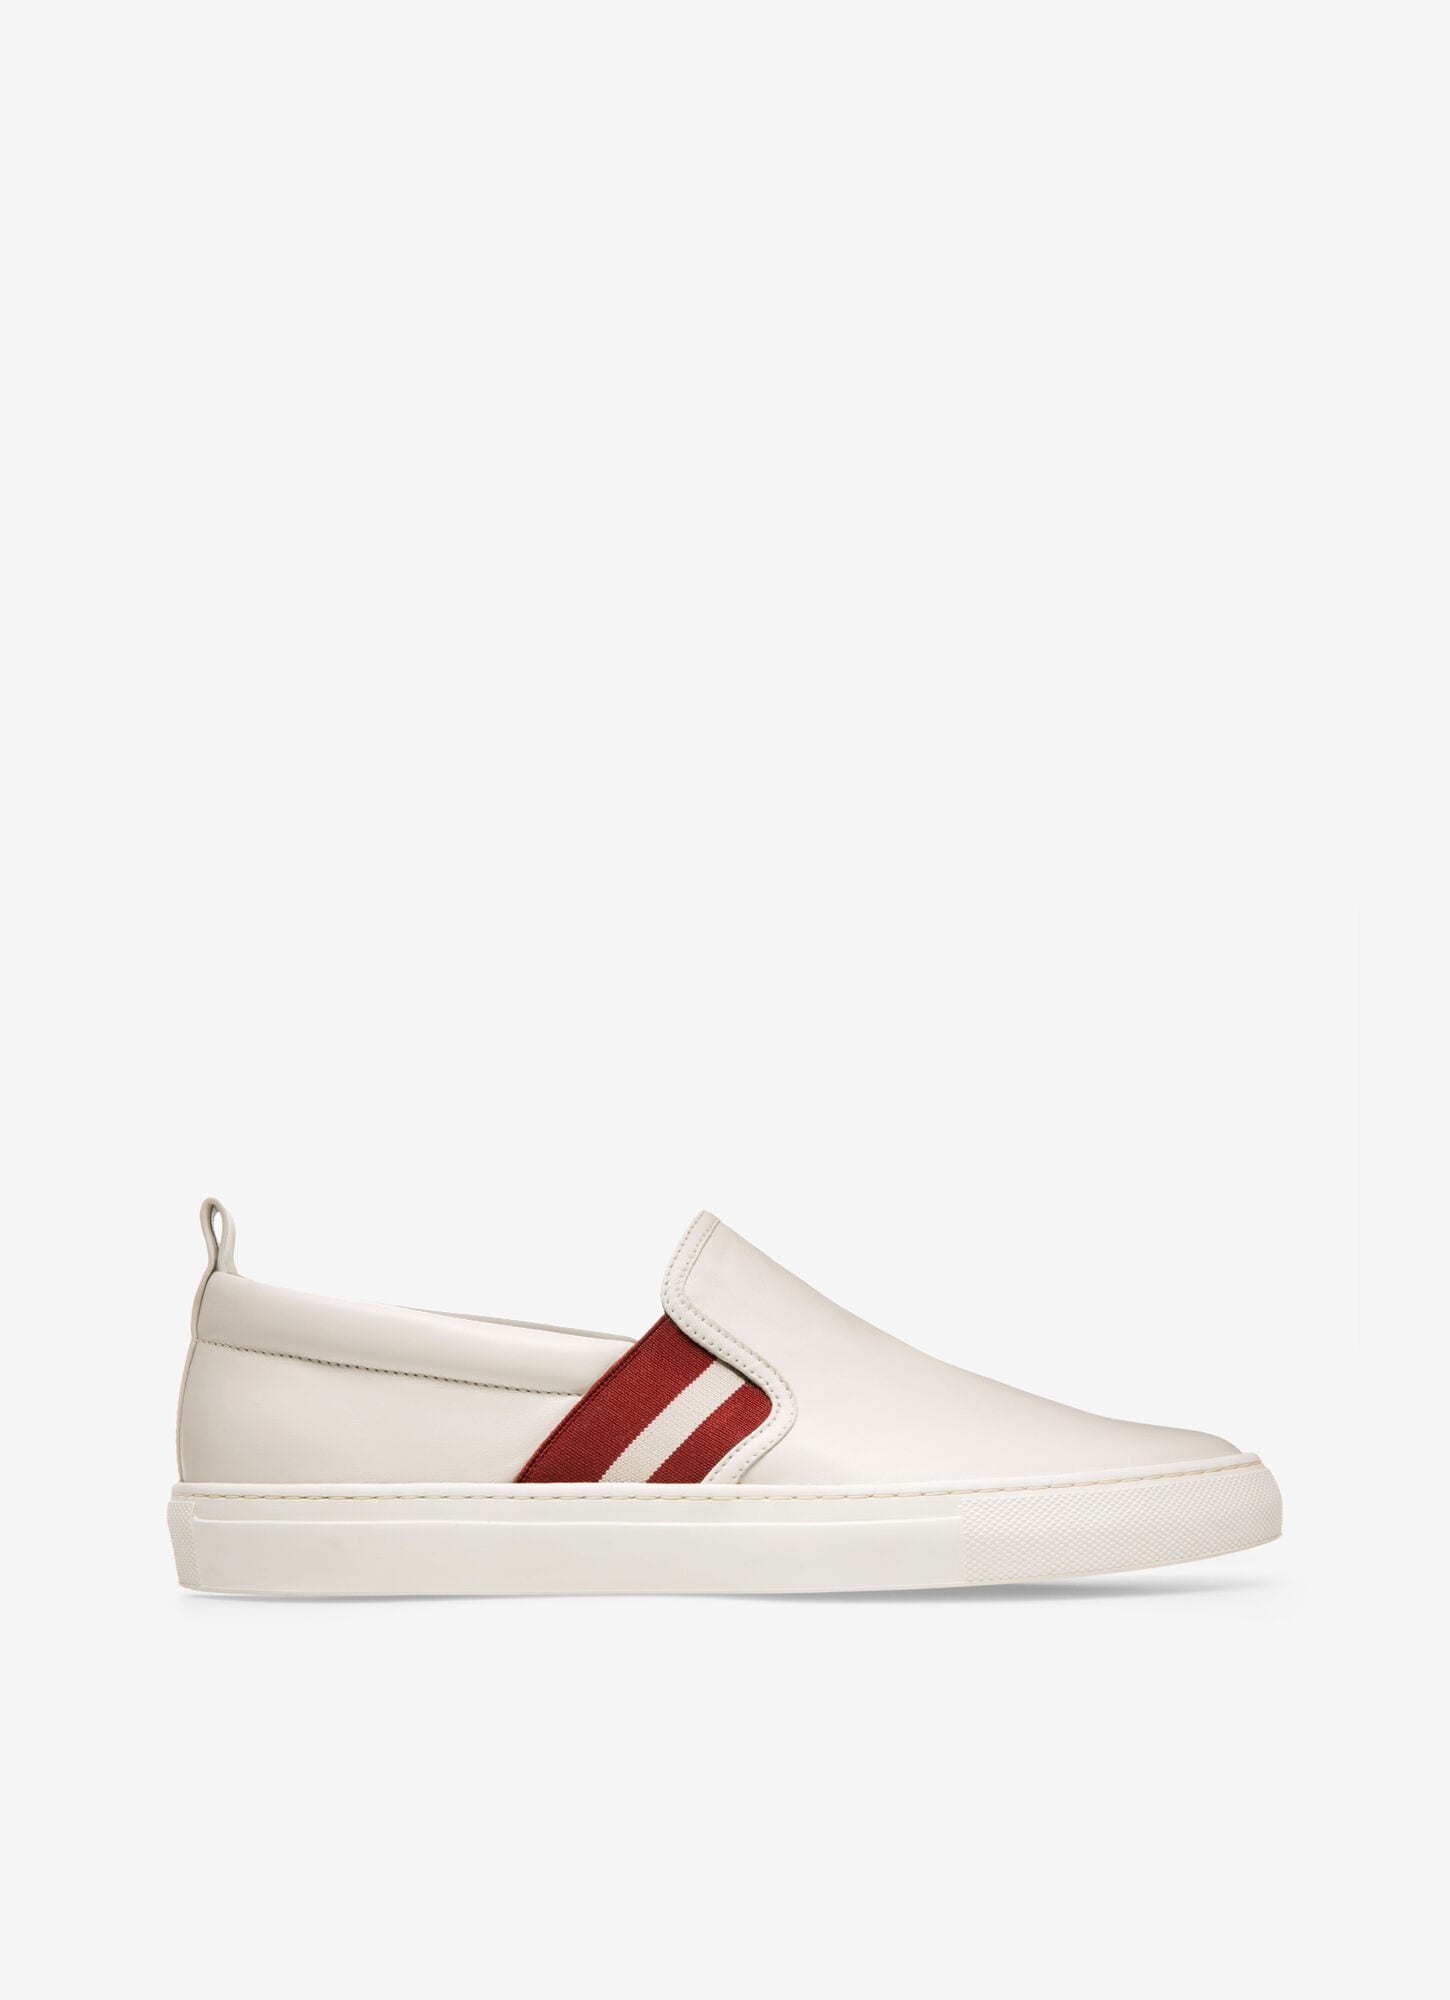 HERALD| Mens Sneakers | White Leather 